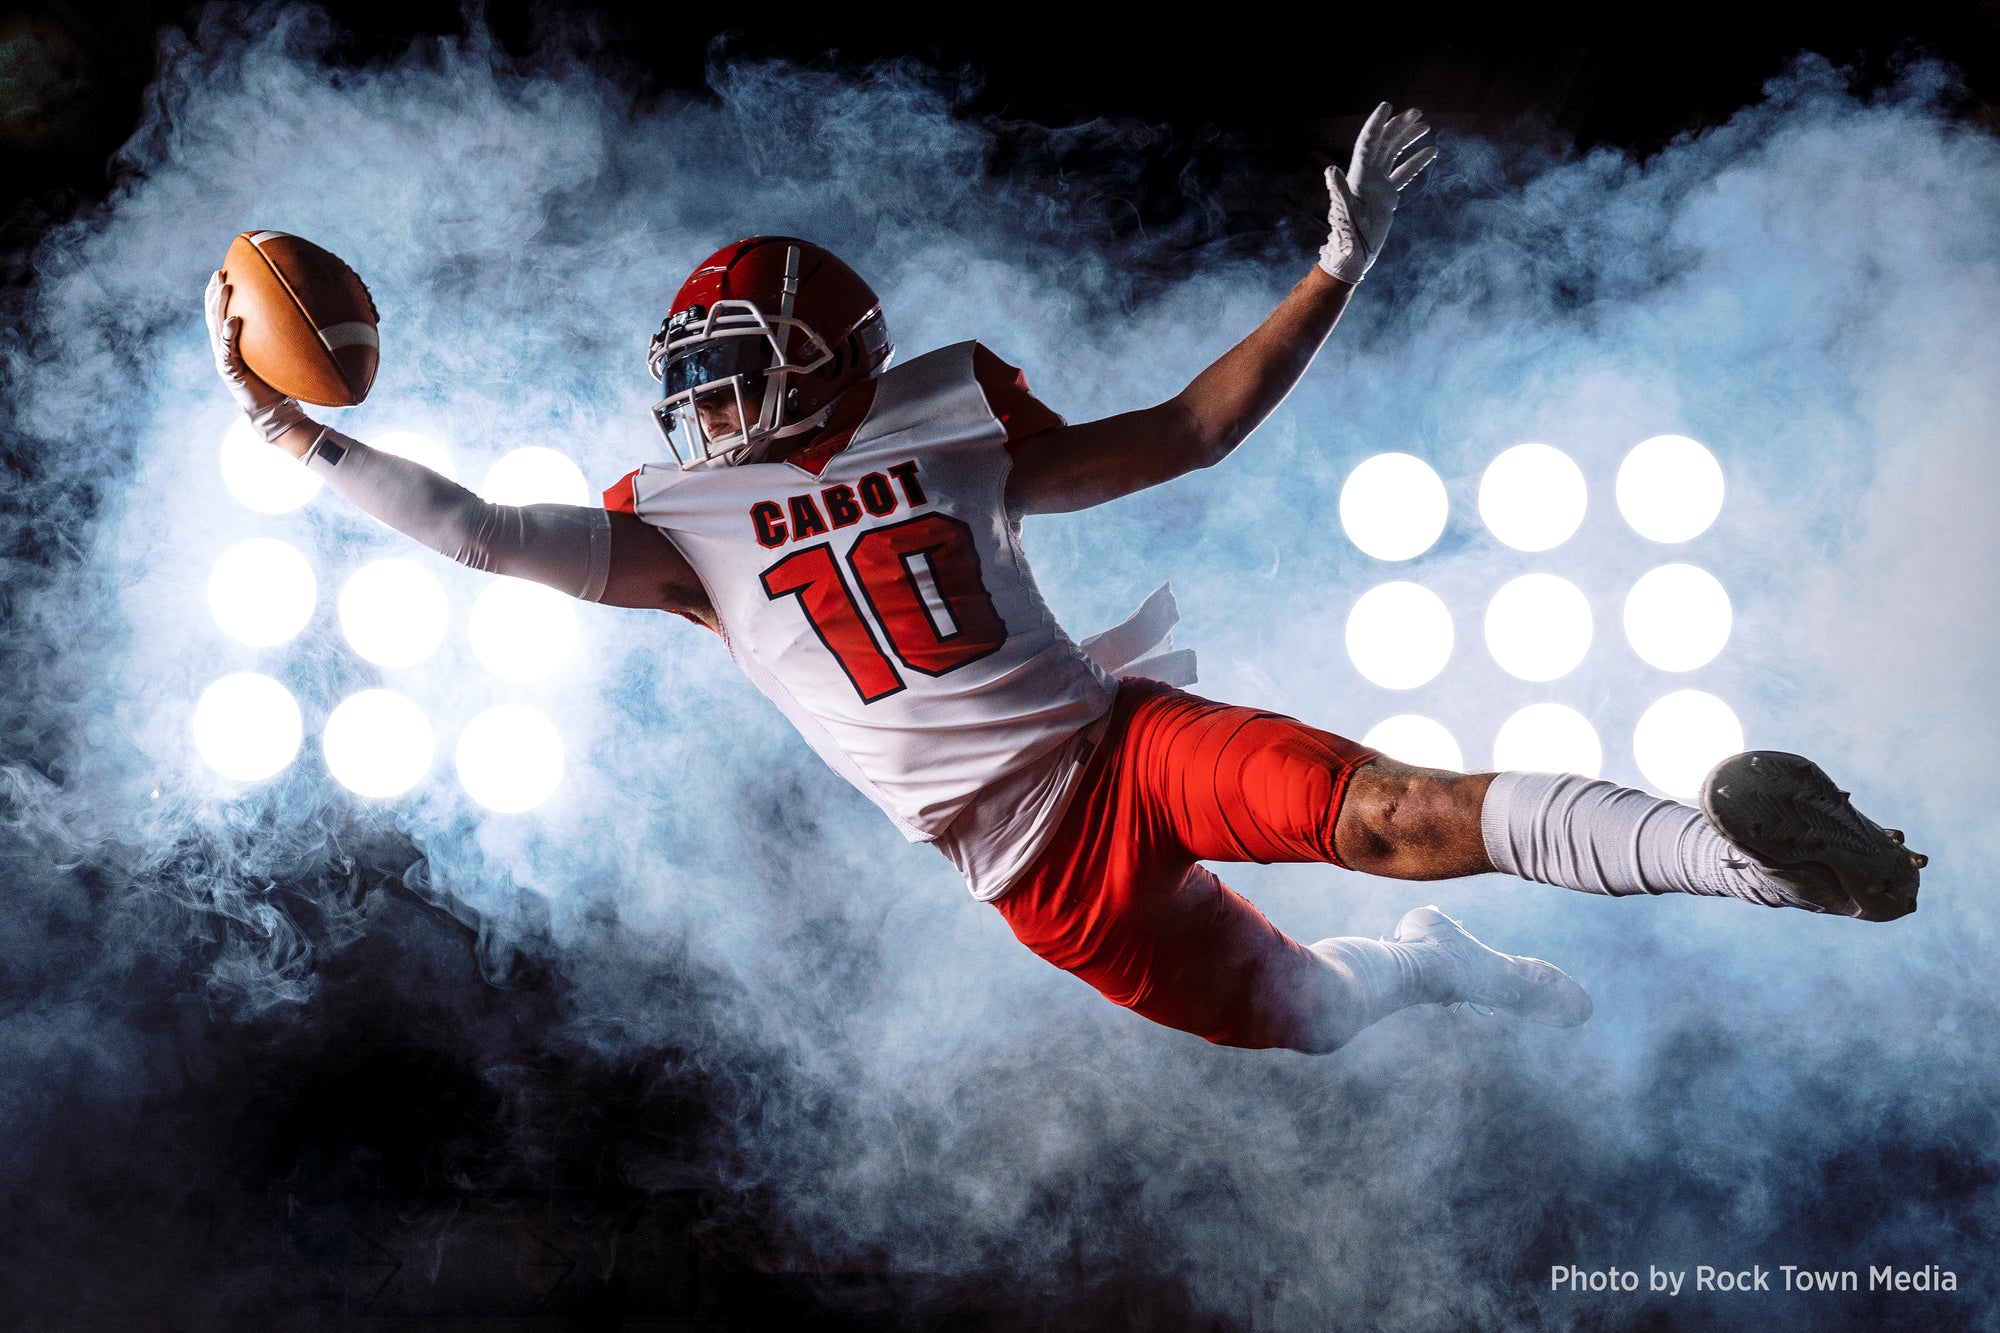 Football portrait using two Pro Light Mods 3x3 by Rock Town Media.